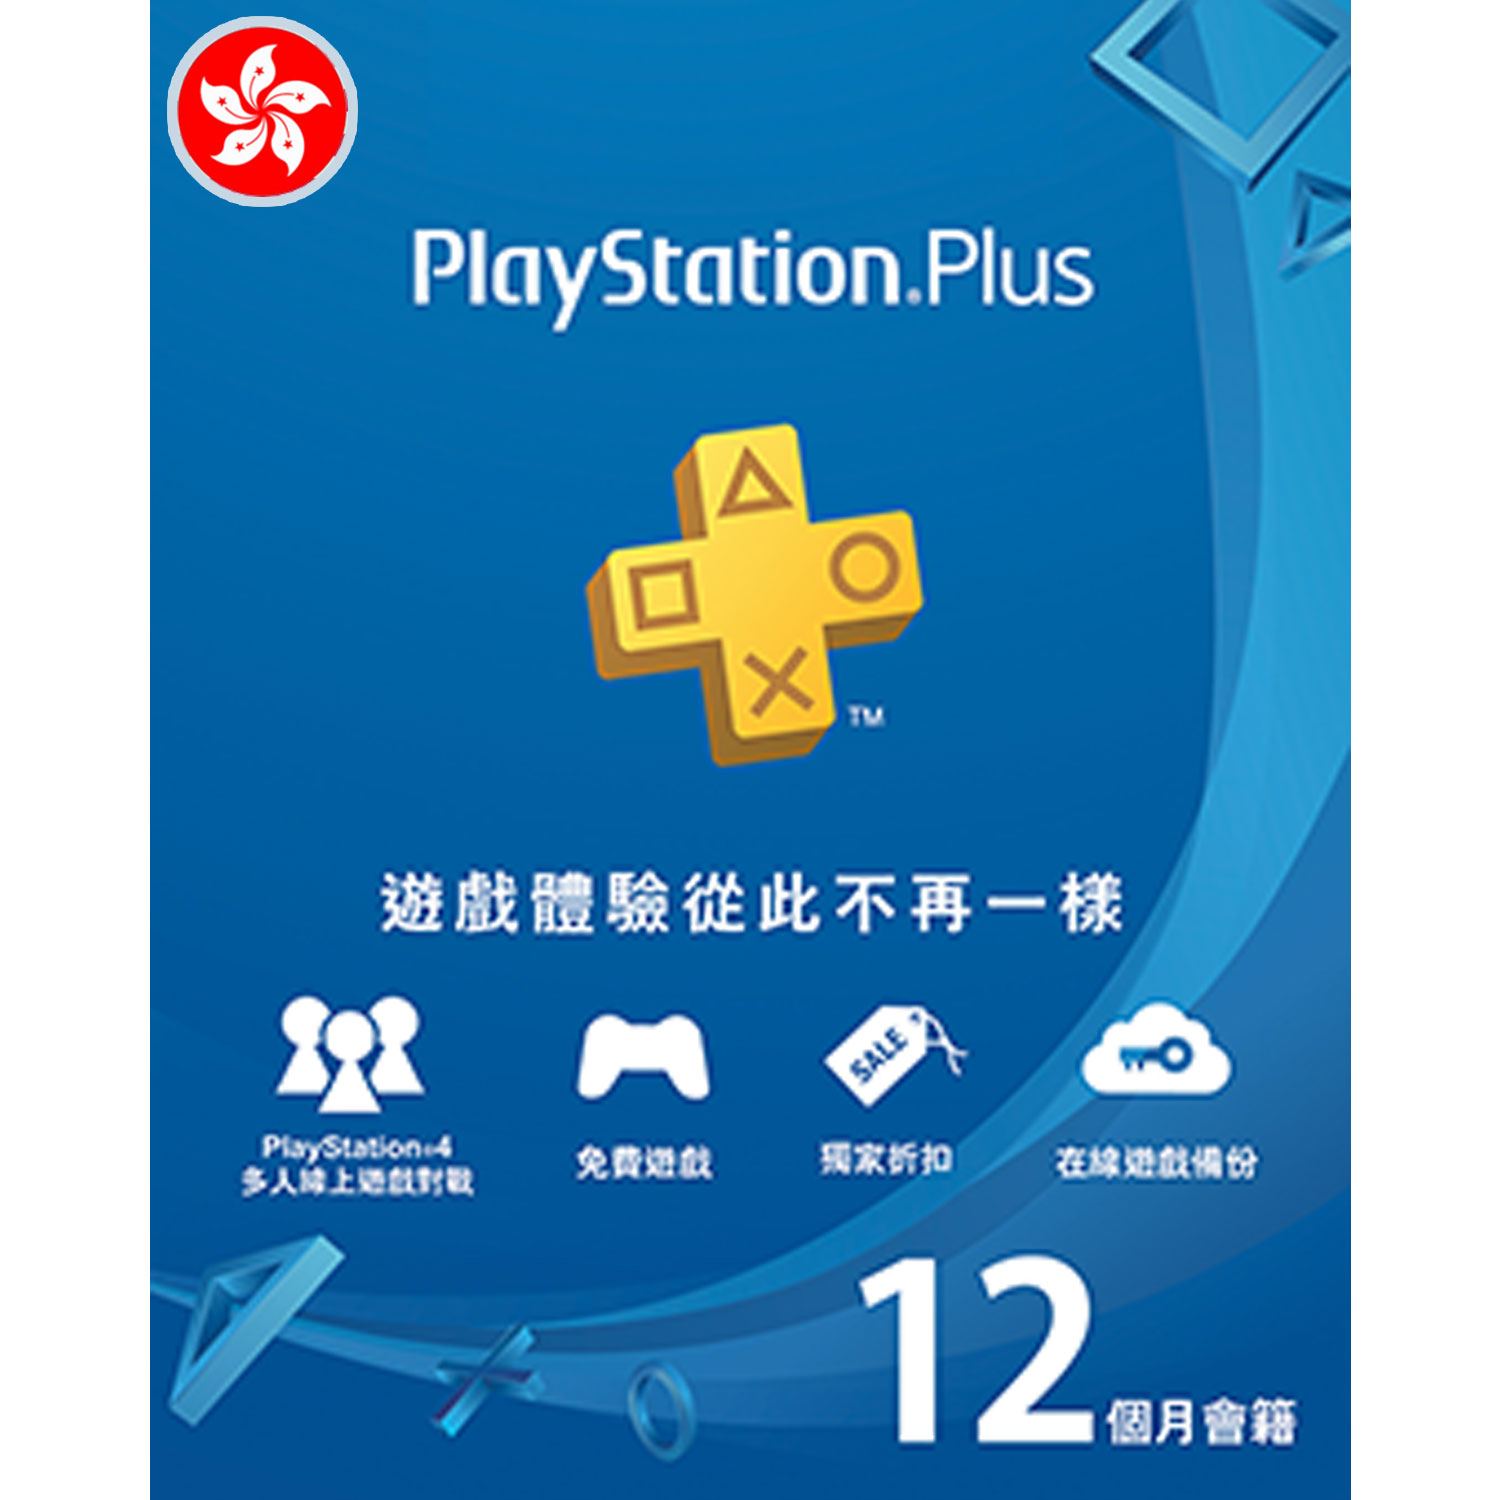 places that sell playstation cards near me